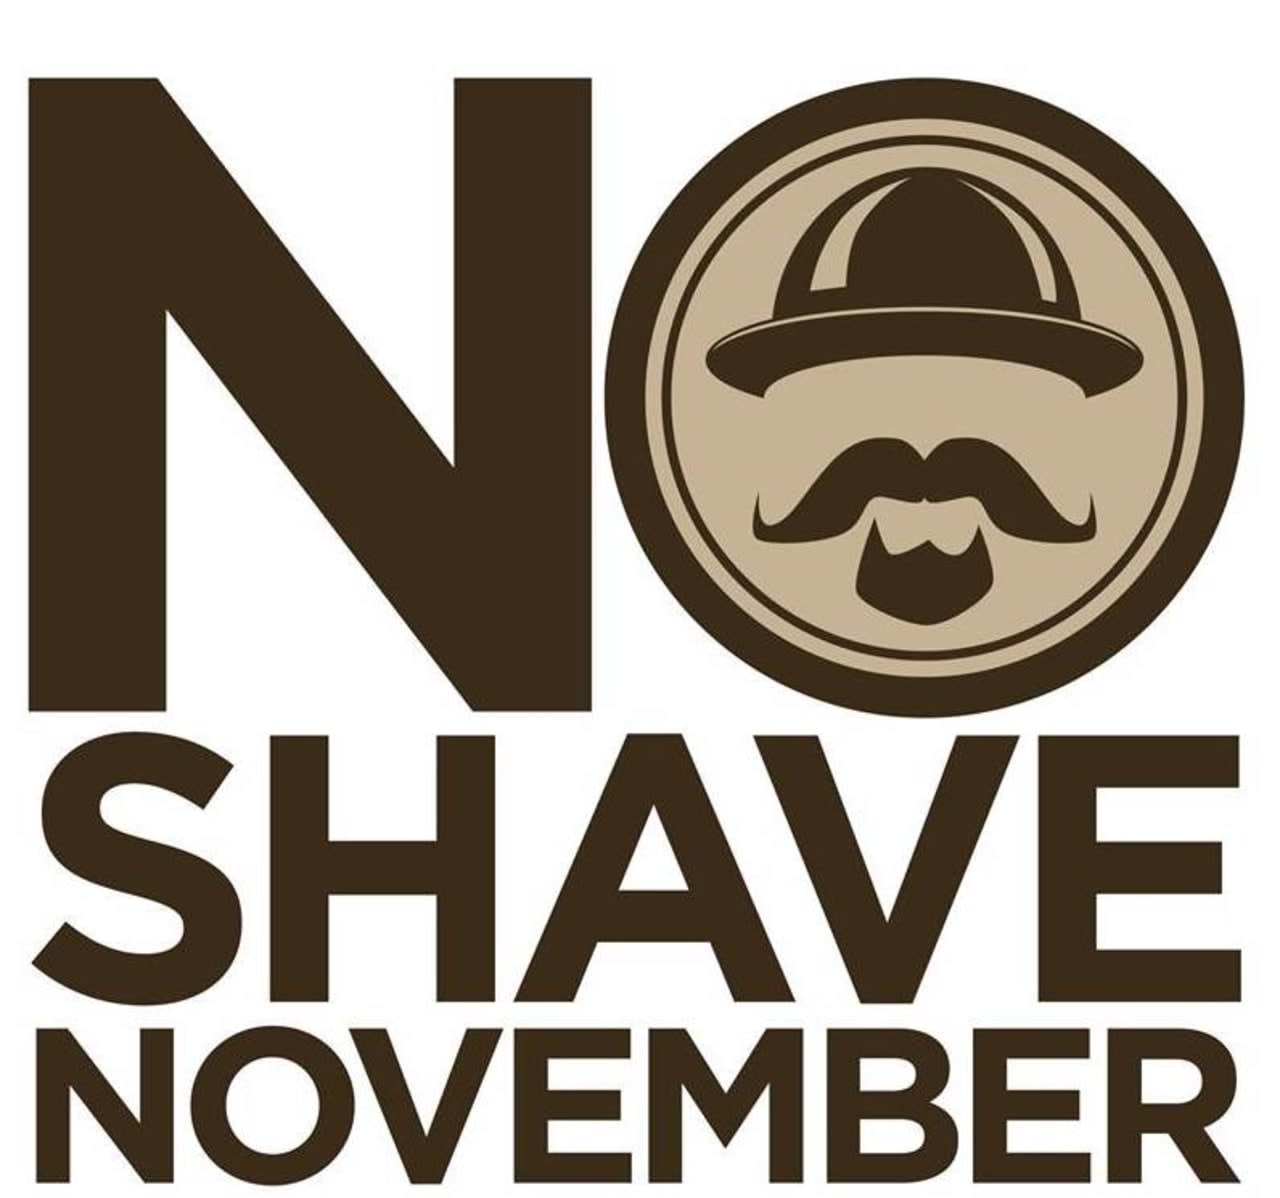 East Fishkill officers are taking part in the annual No Shave November effort.